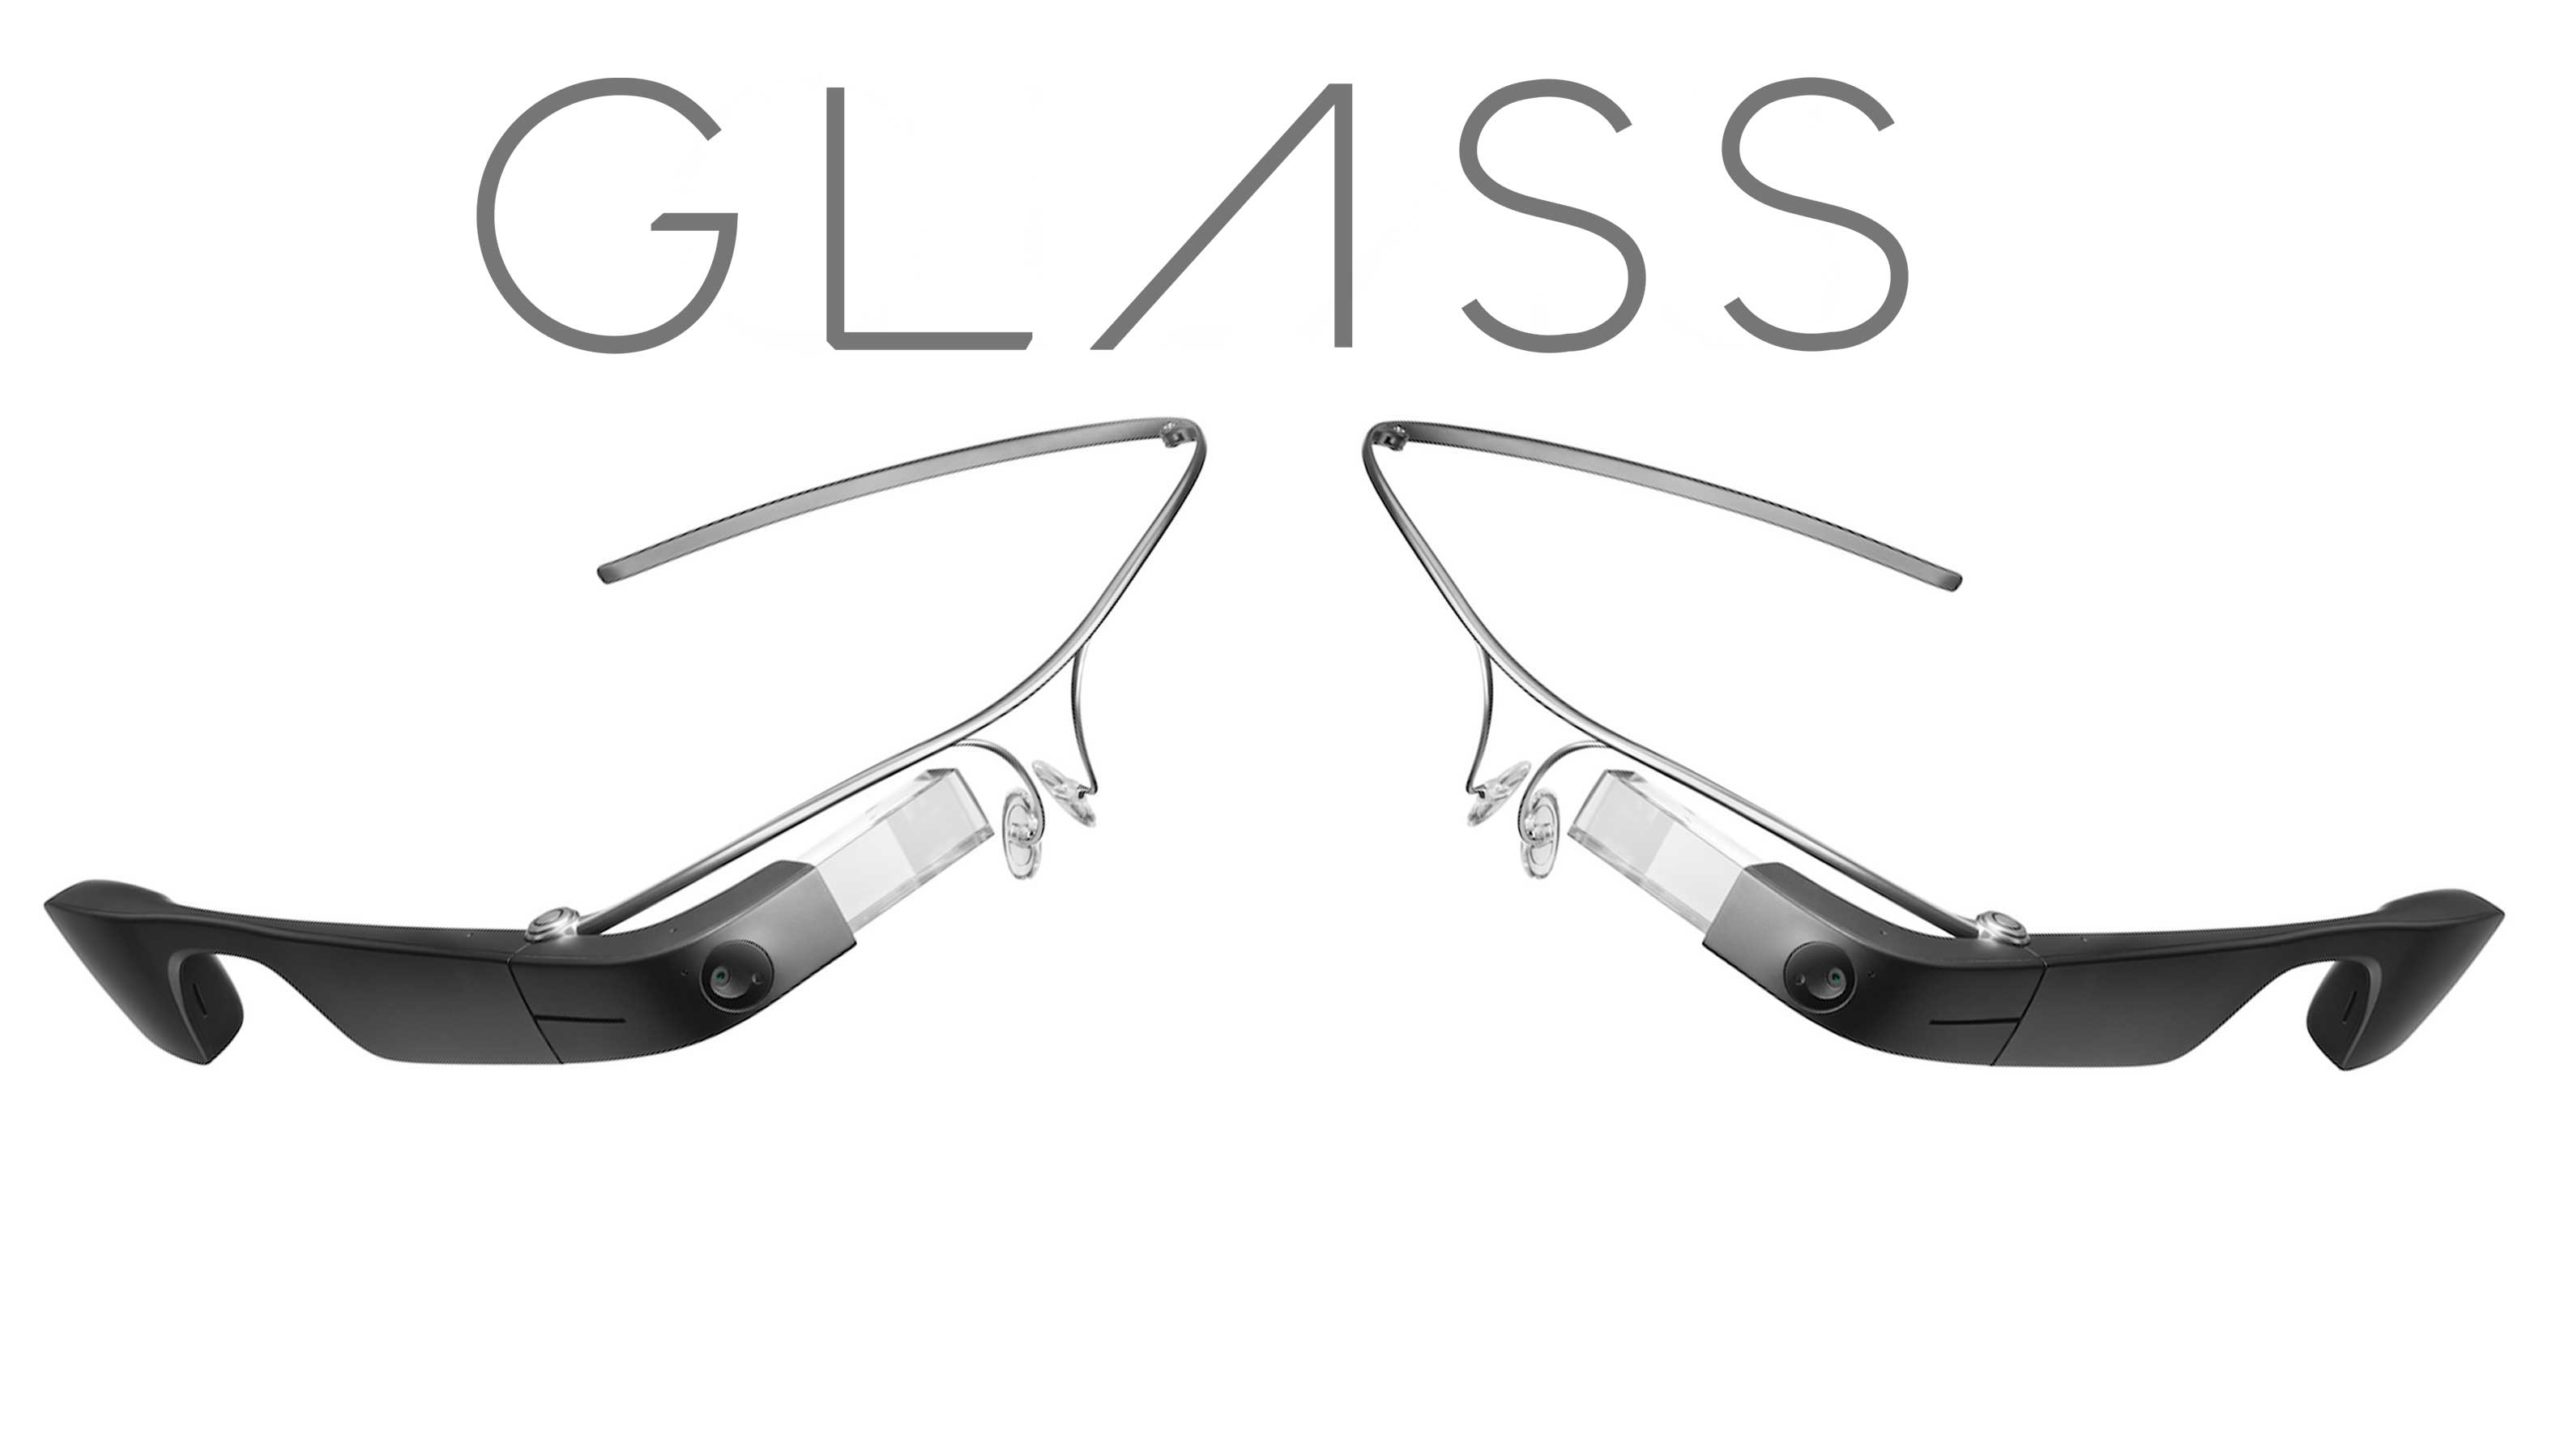 Google has made it a little easier to get Google Glass